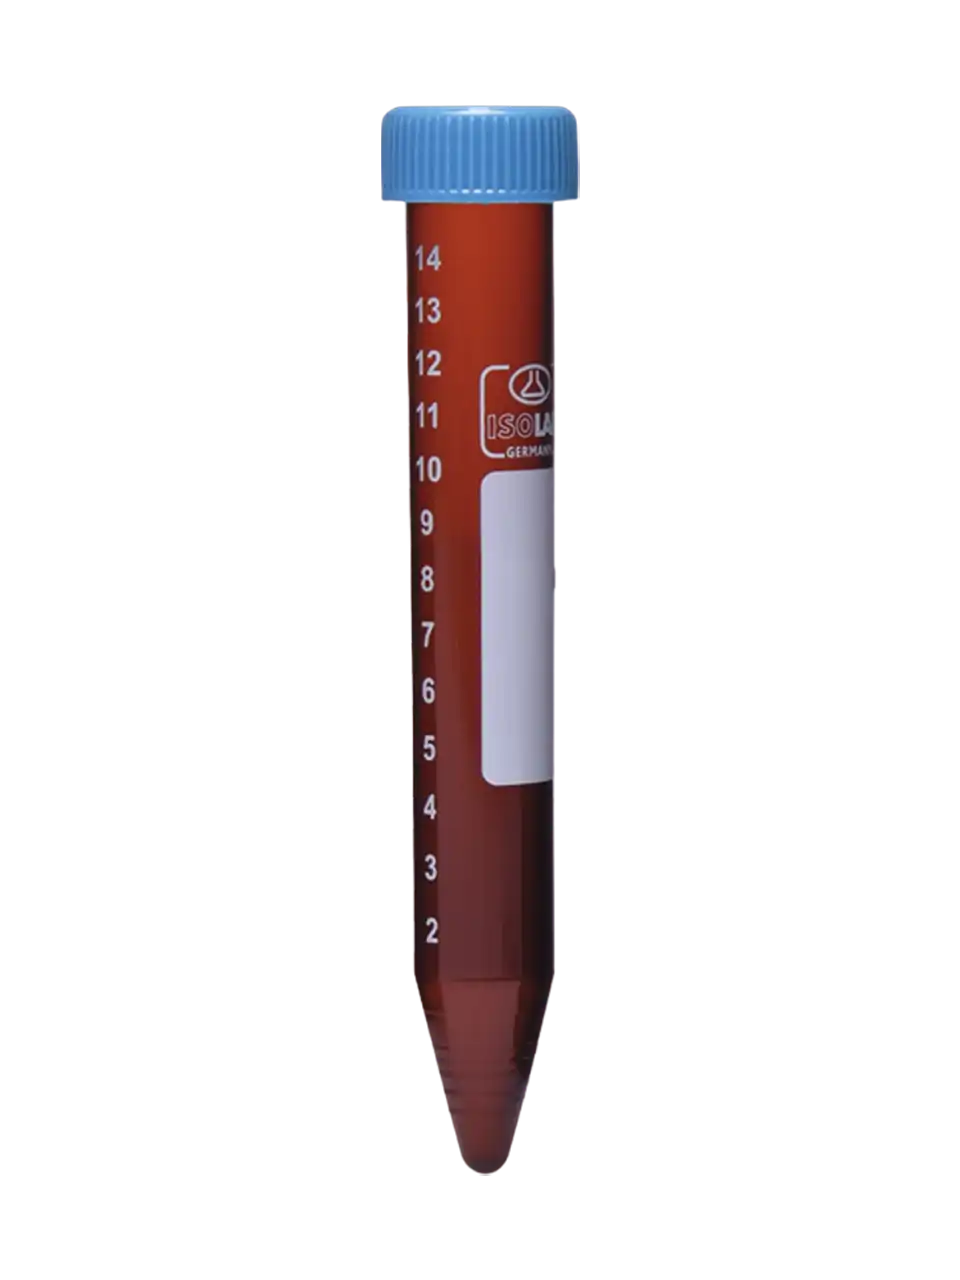 Centrifuge (Falcon) Tube, P.P, Amber, Screw Cap, Conical Bottom, W/O Skirt, Autoclavable, Sterile (DNA/RNA Free), Single Flow Pack, 15 ml Volume, 50 pcs/pack